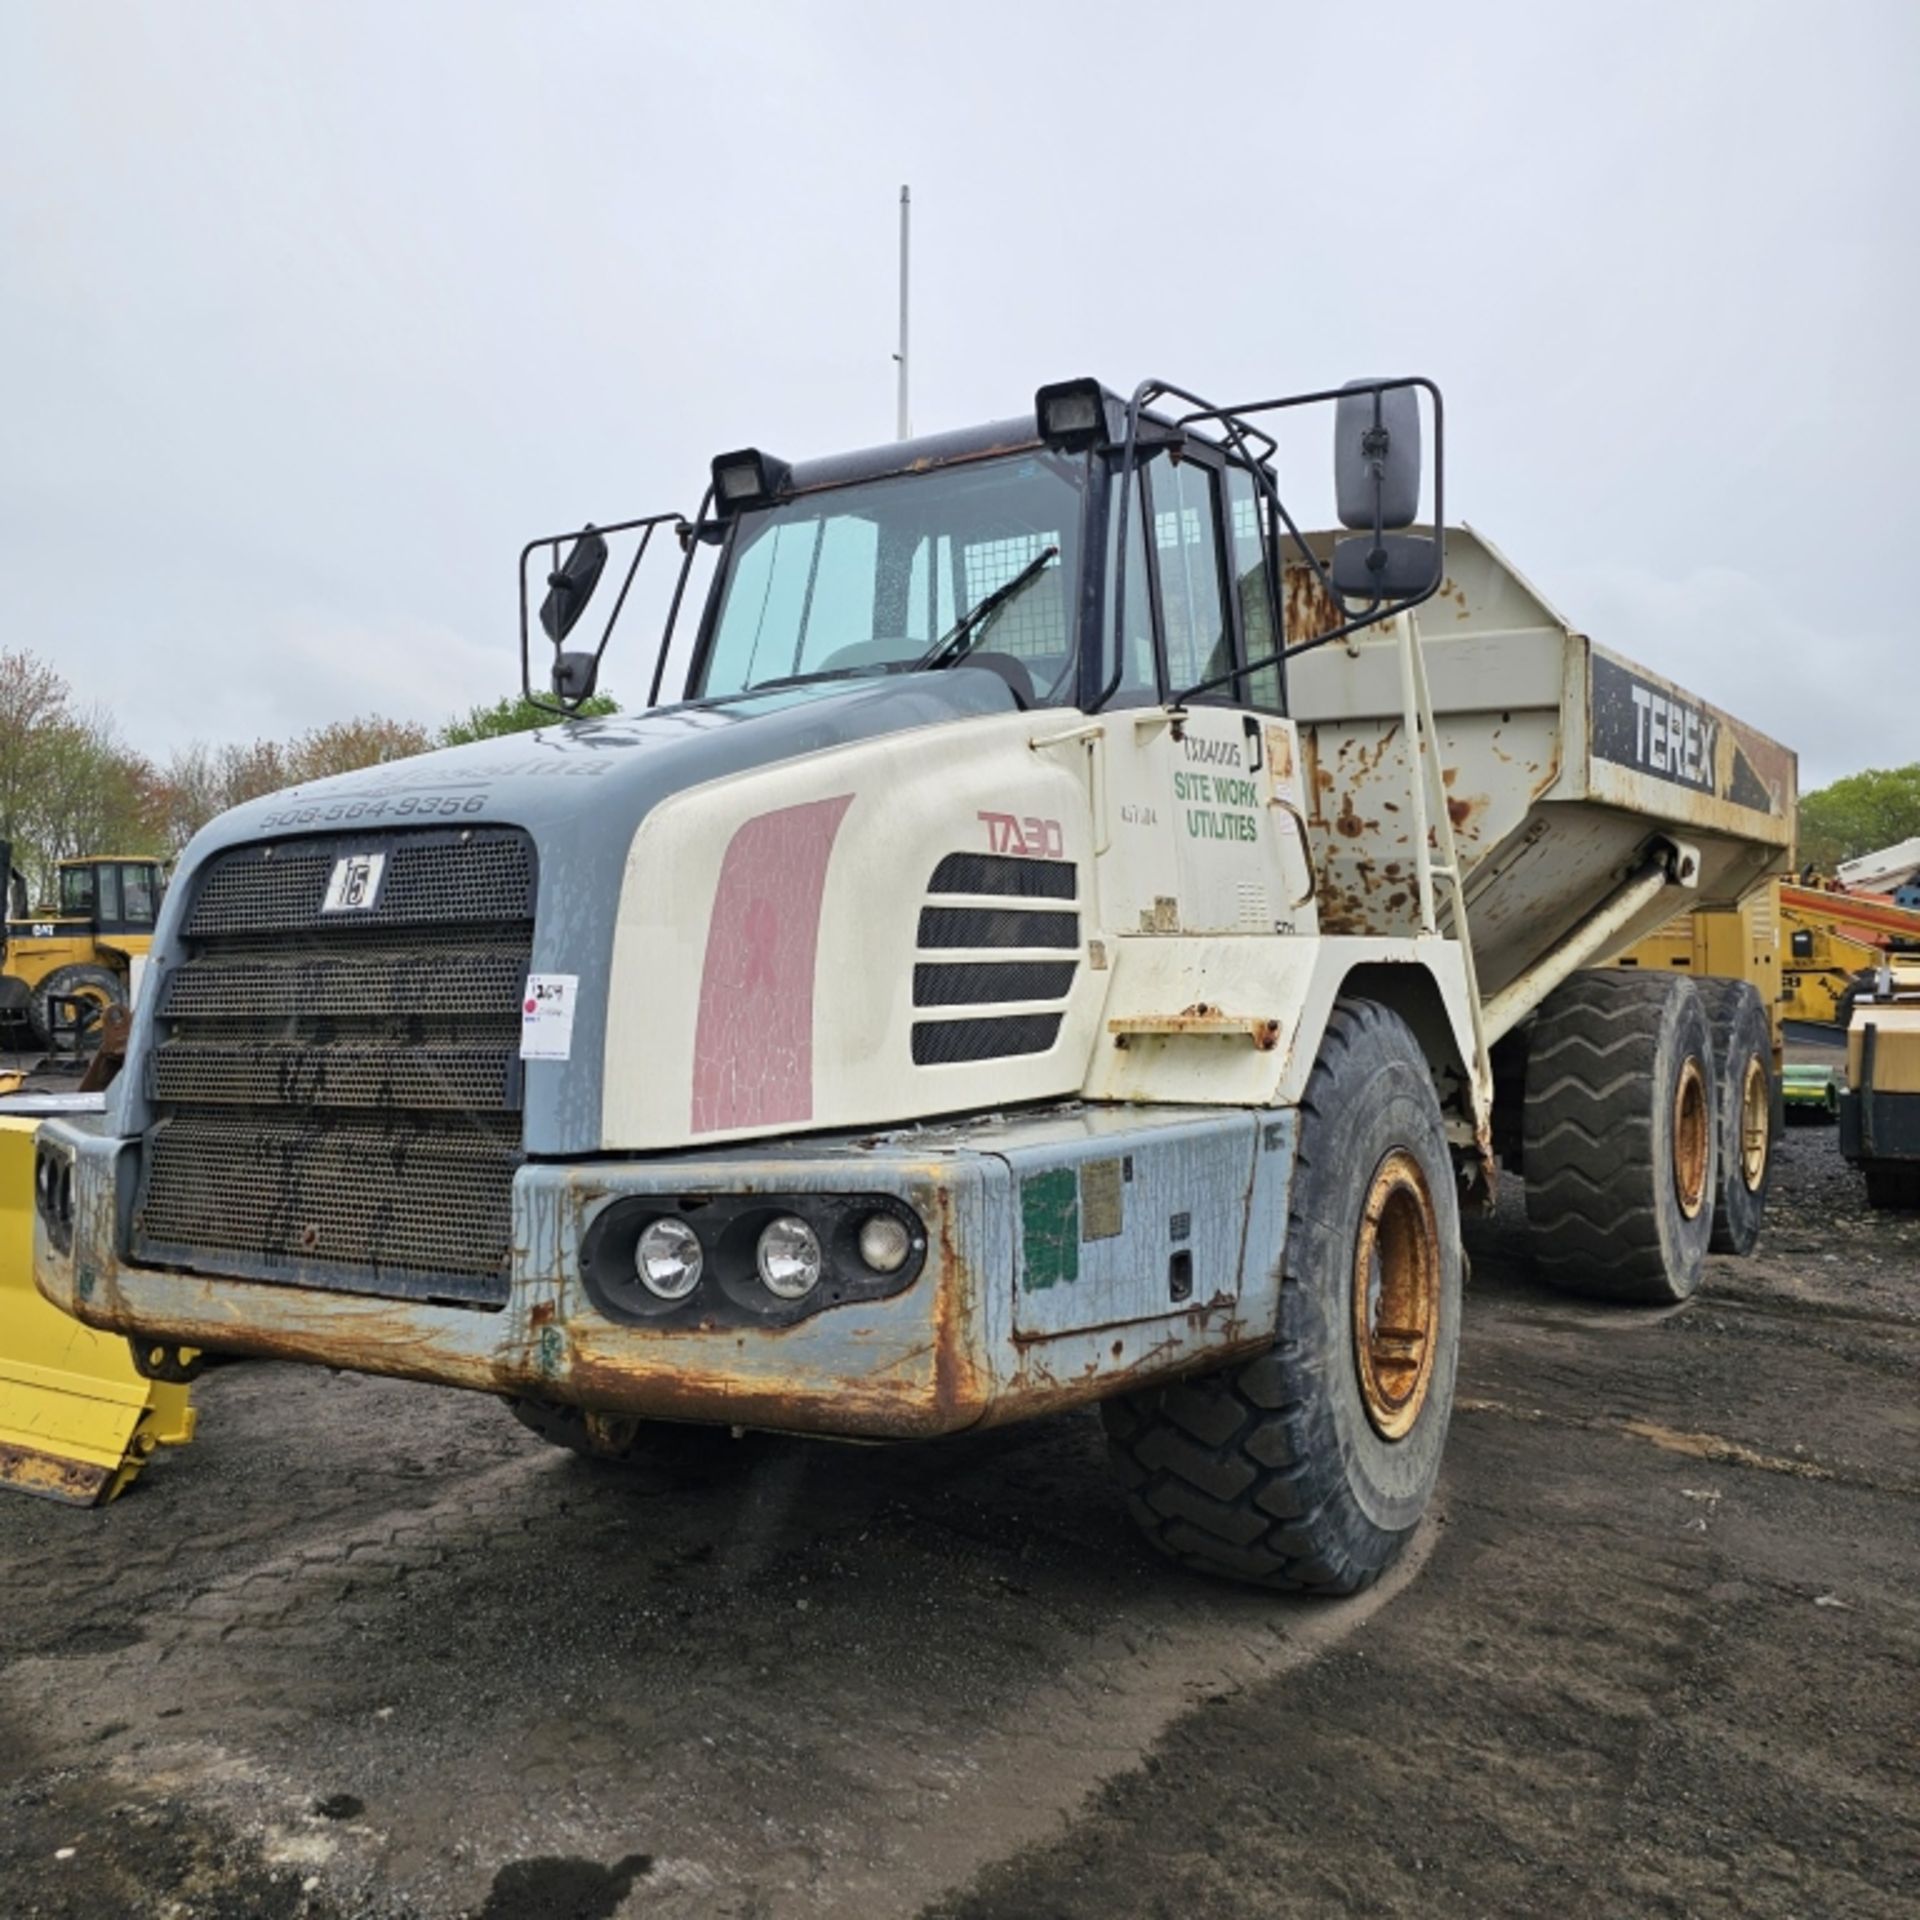 Terex Ta30 Articulated Haul Truck - Image 2 of 11